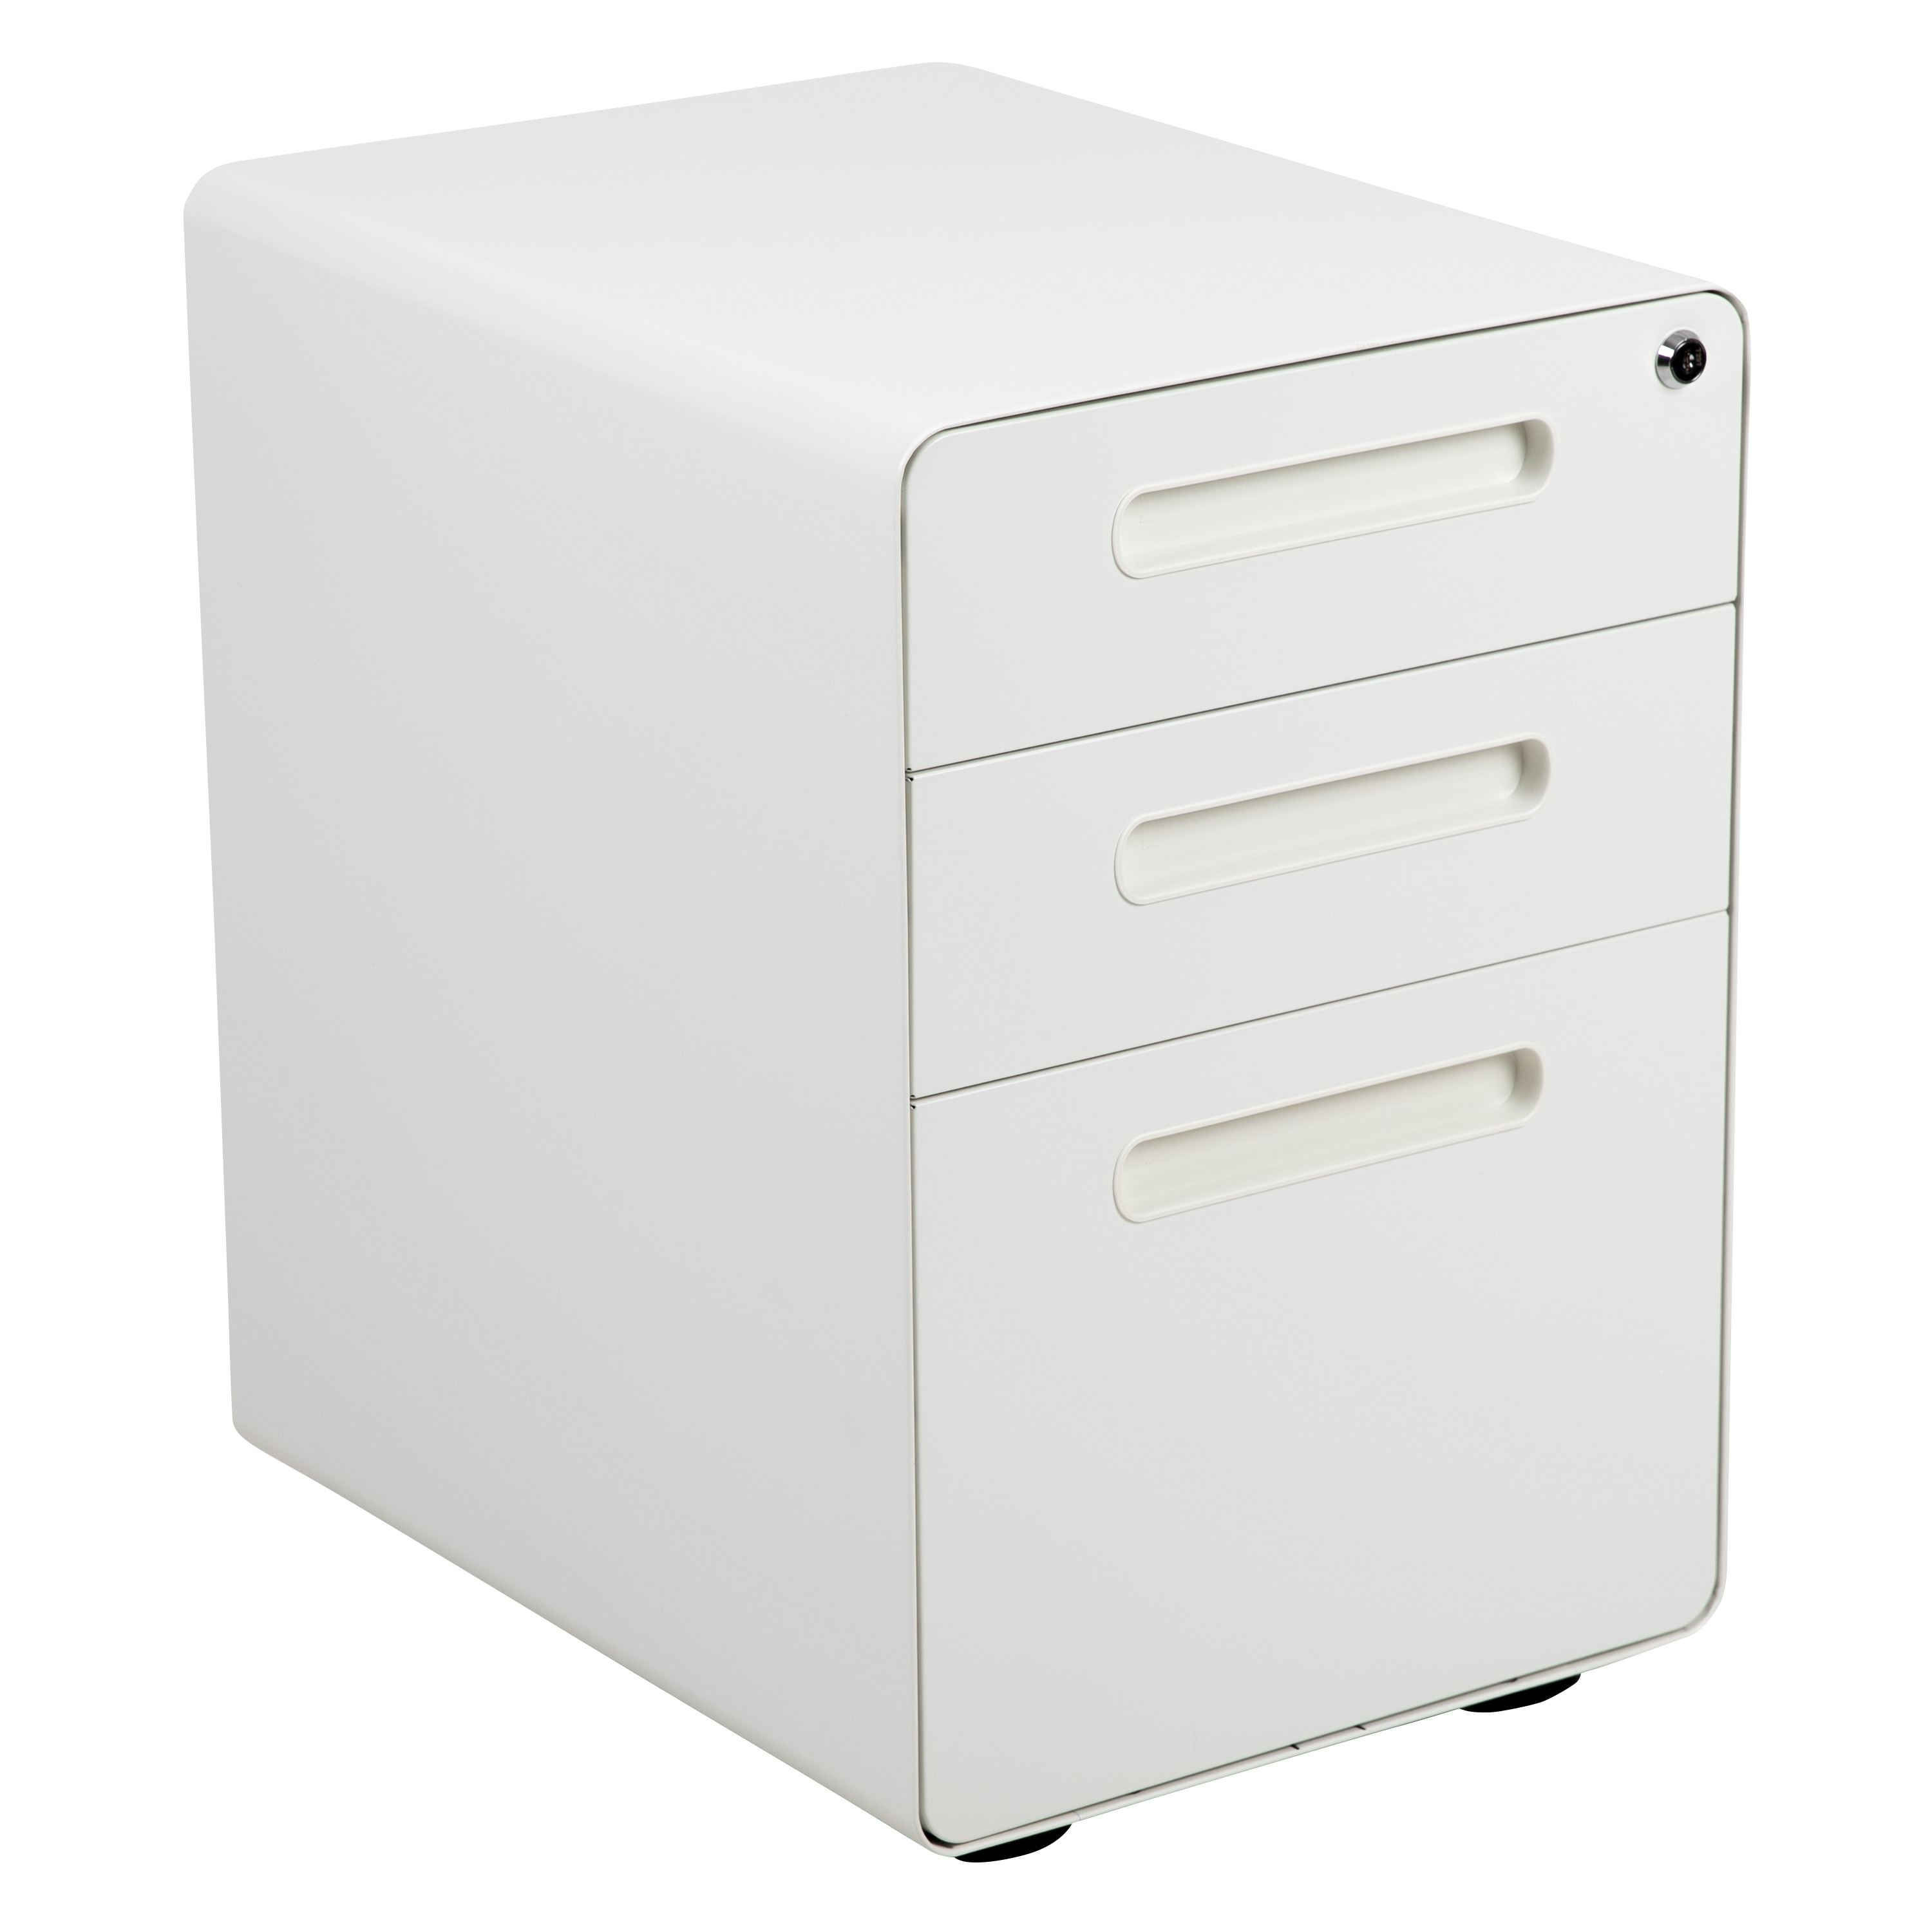 3 Drawer Filing Cabinet with Lock Rolling File Cabinet with 5 Wheels,INTERGREAT Locking Filing Cabinet for Office Home Metal White A 